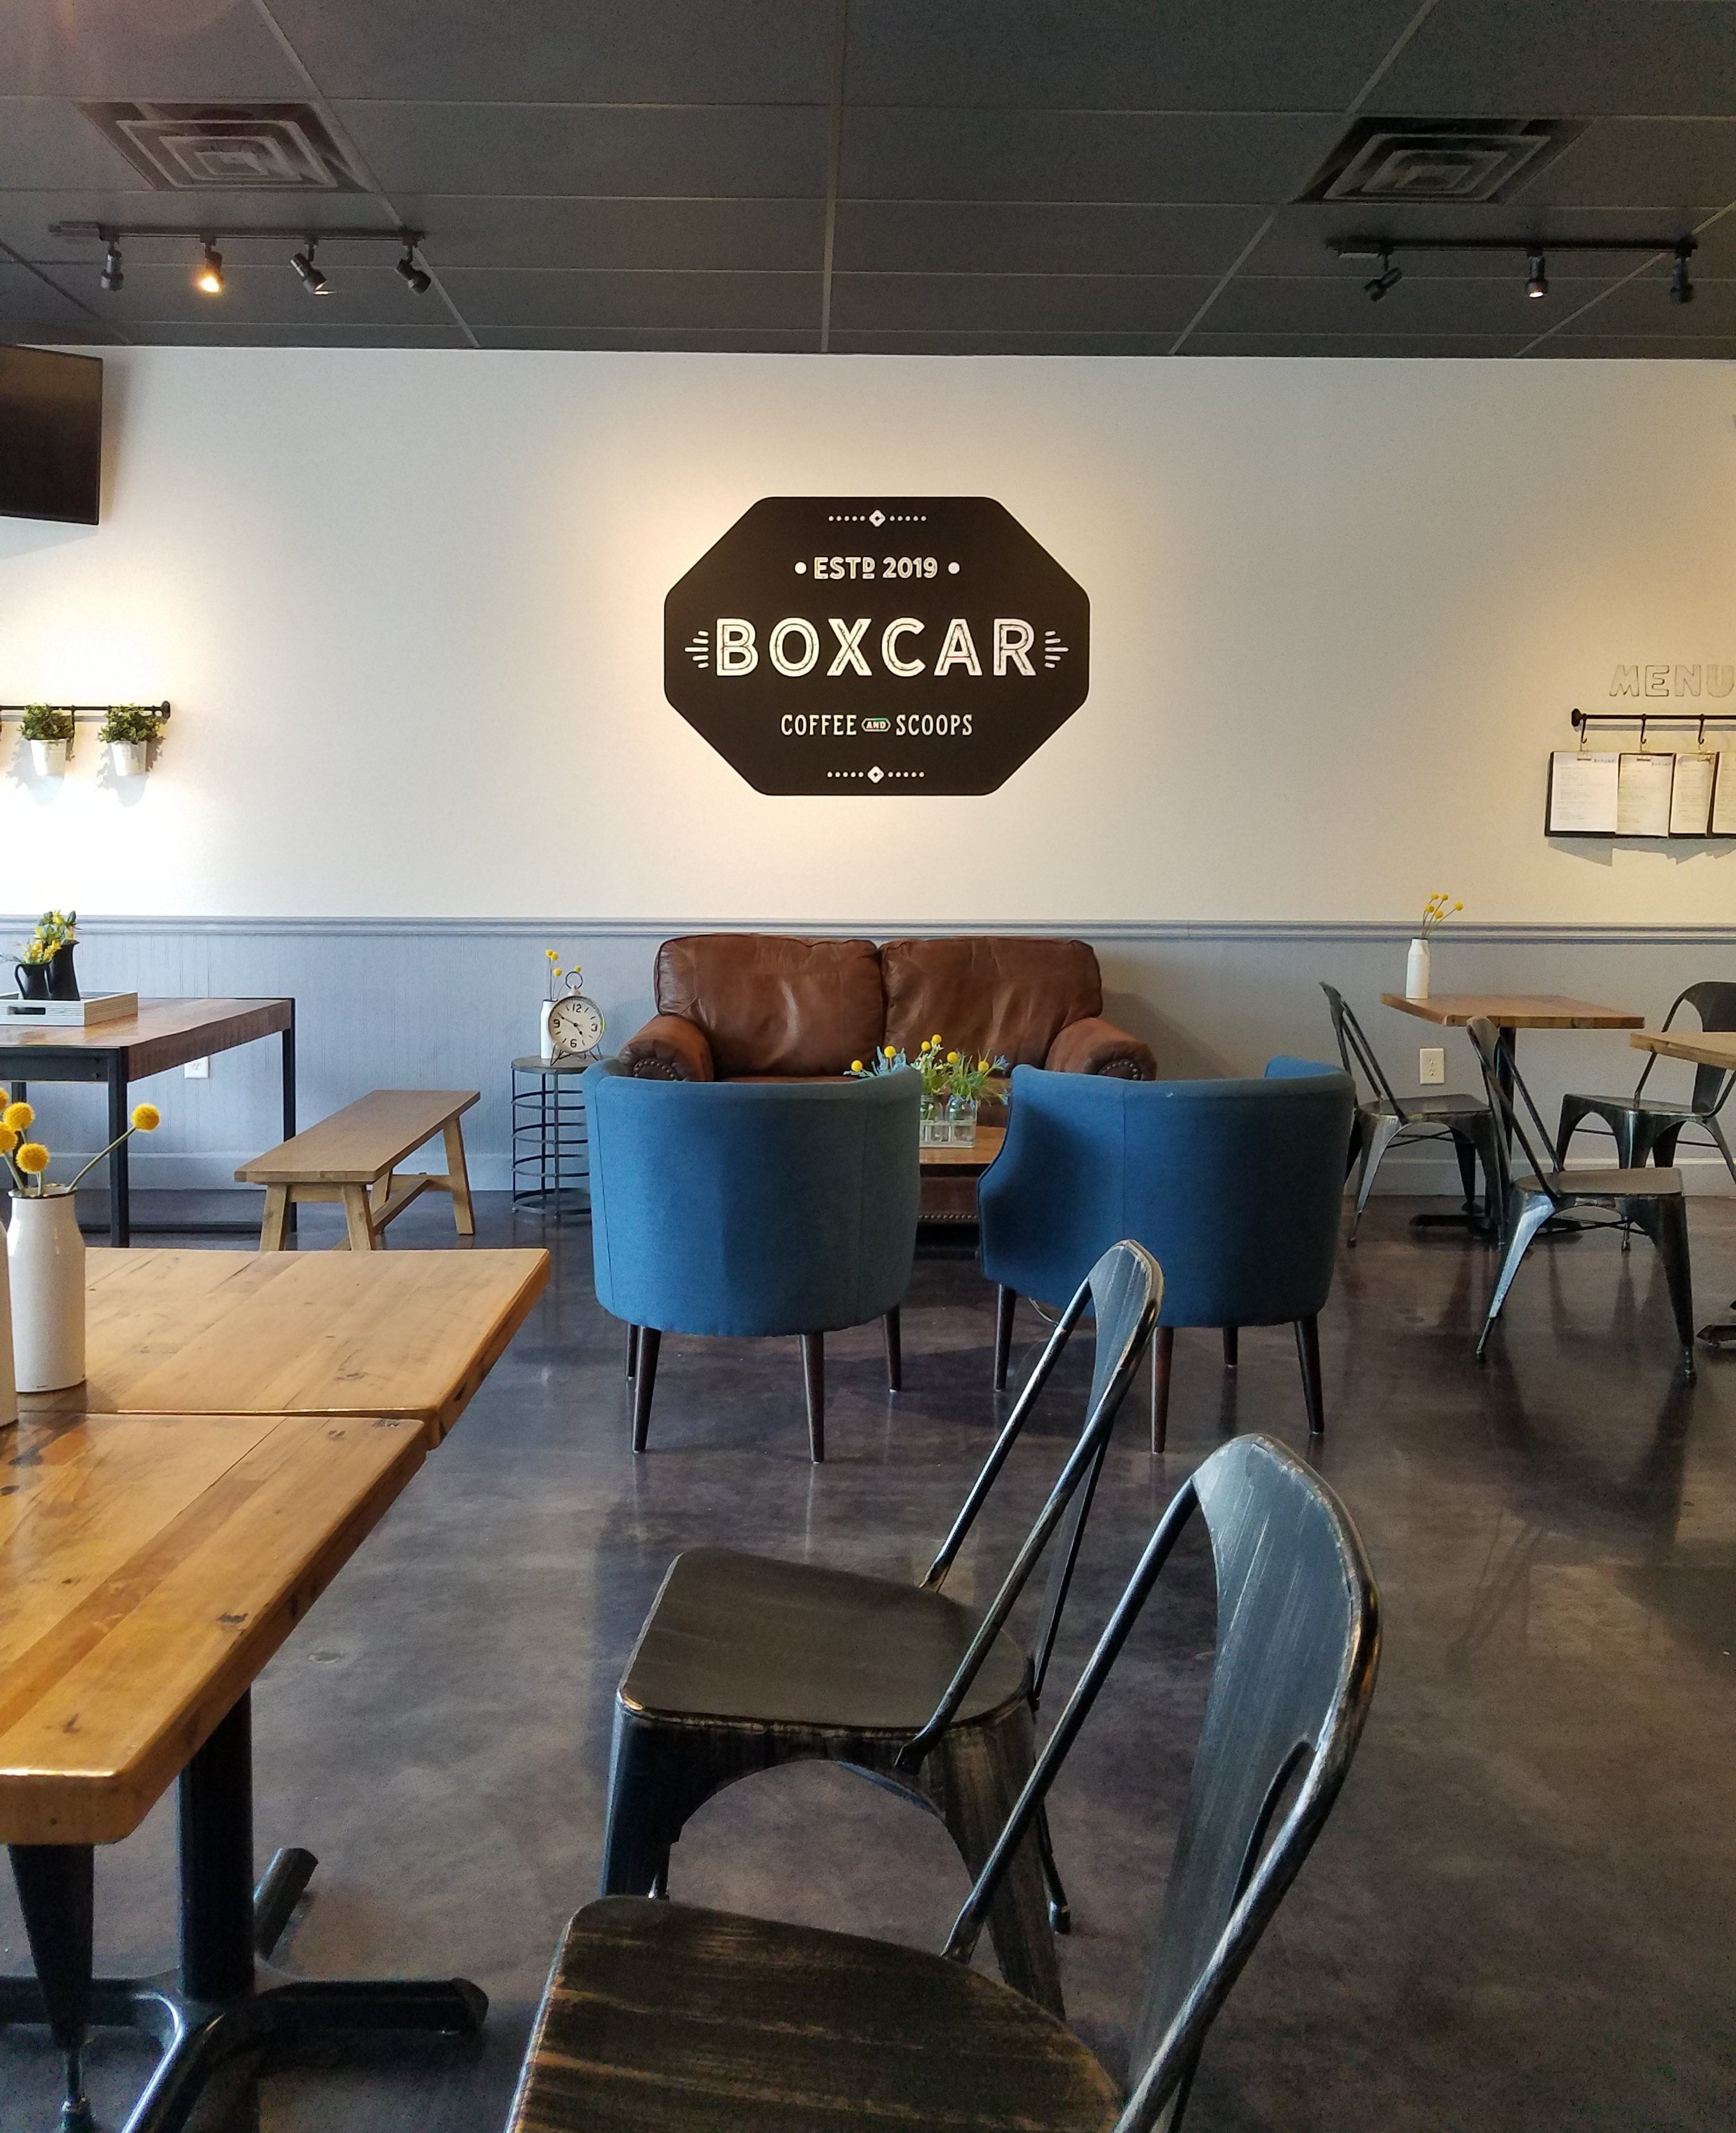 Boxcar- coffee and scoops in Knightdale NC